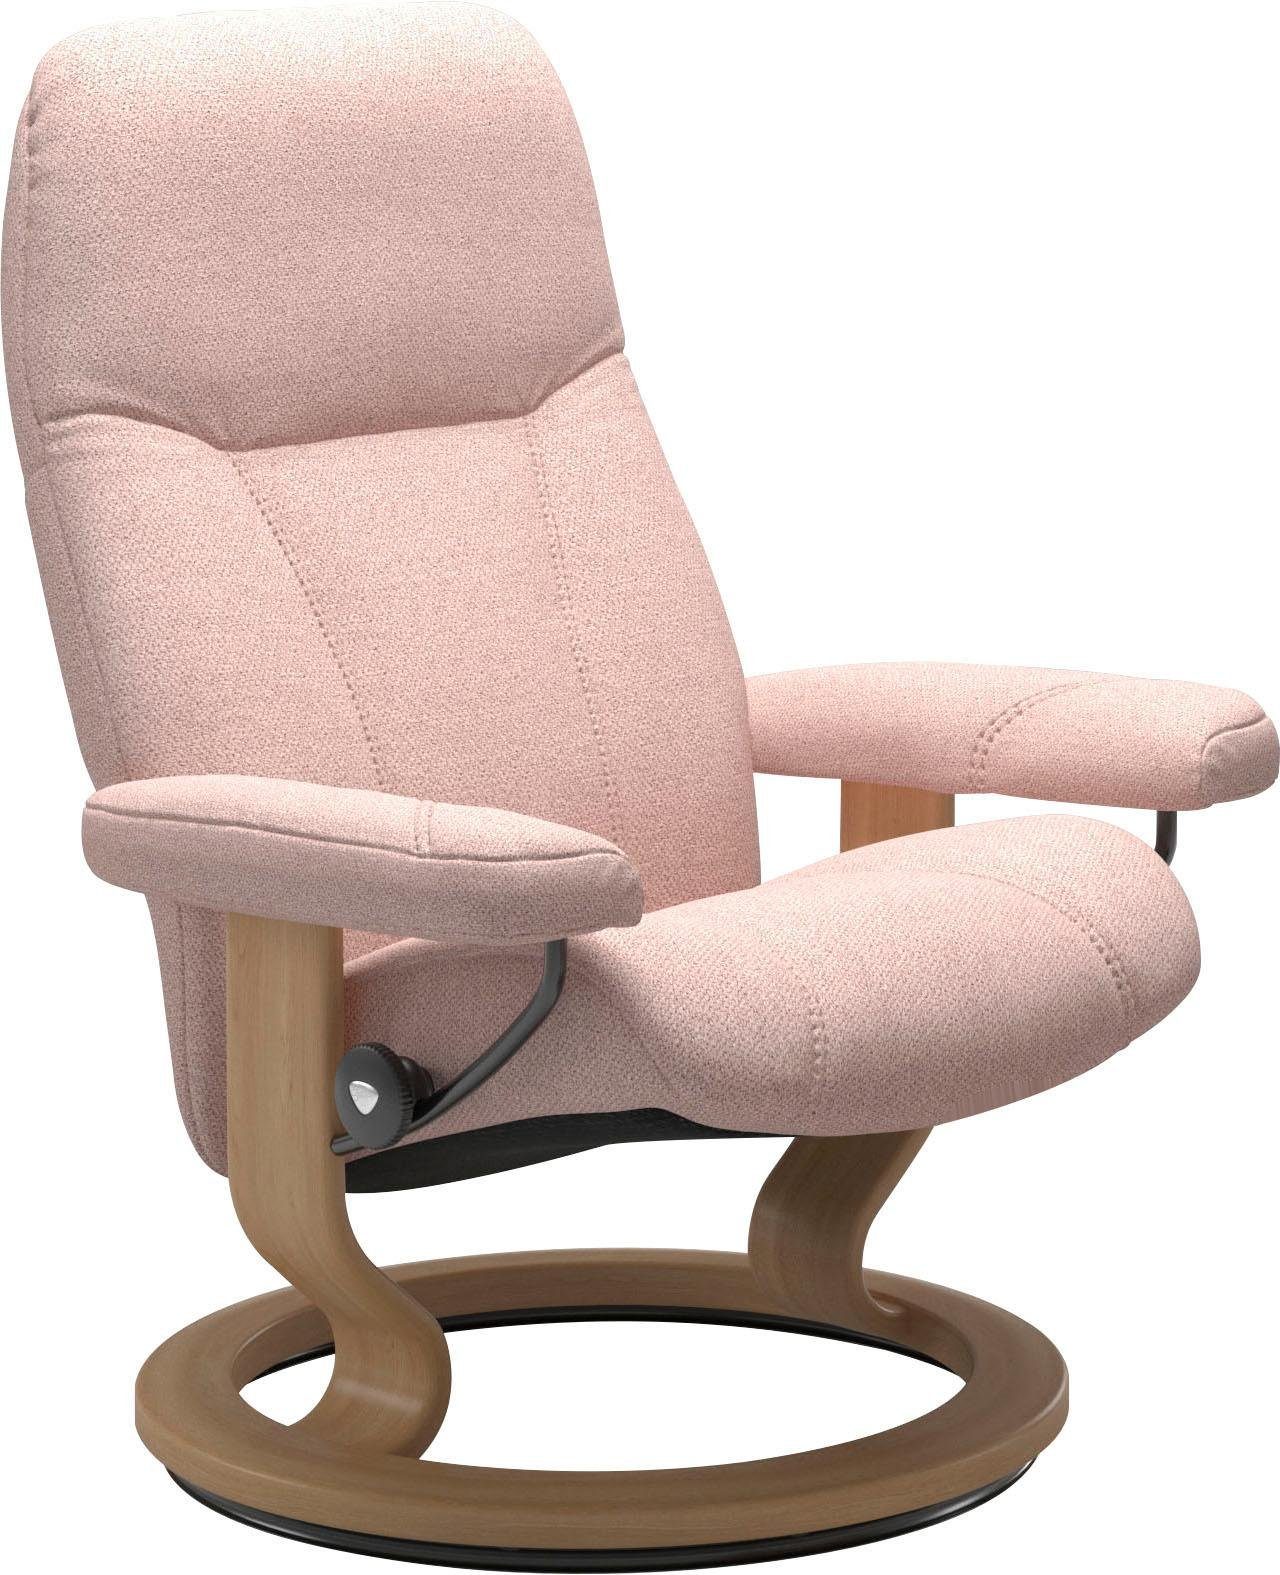 Stressless® Relaxsessel Consul, mit Classic Base, Größe L, Gestell Eiche | Funktionssessel